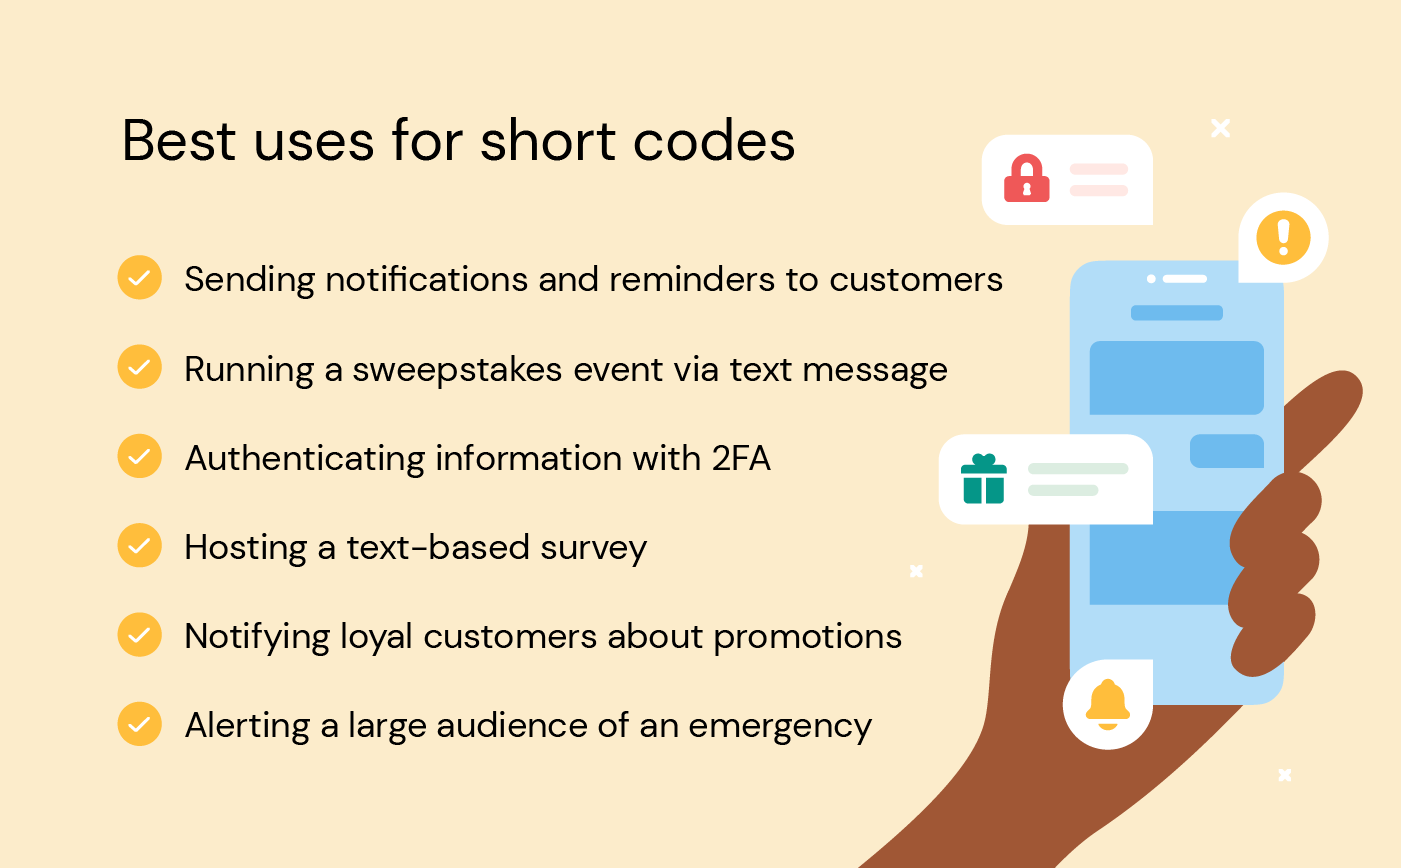 Best uses for short codes include sending notifications and reminders to customers, running a sweepstakes event via text message, authenticating info with 2FA, hosting a text-based survey, notifying local customers about promotions, and alerting a large audience of an emergency. Illustration shows a hand holding a blue phone.